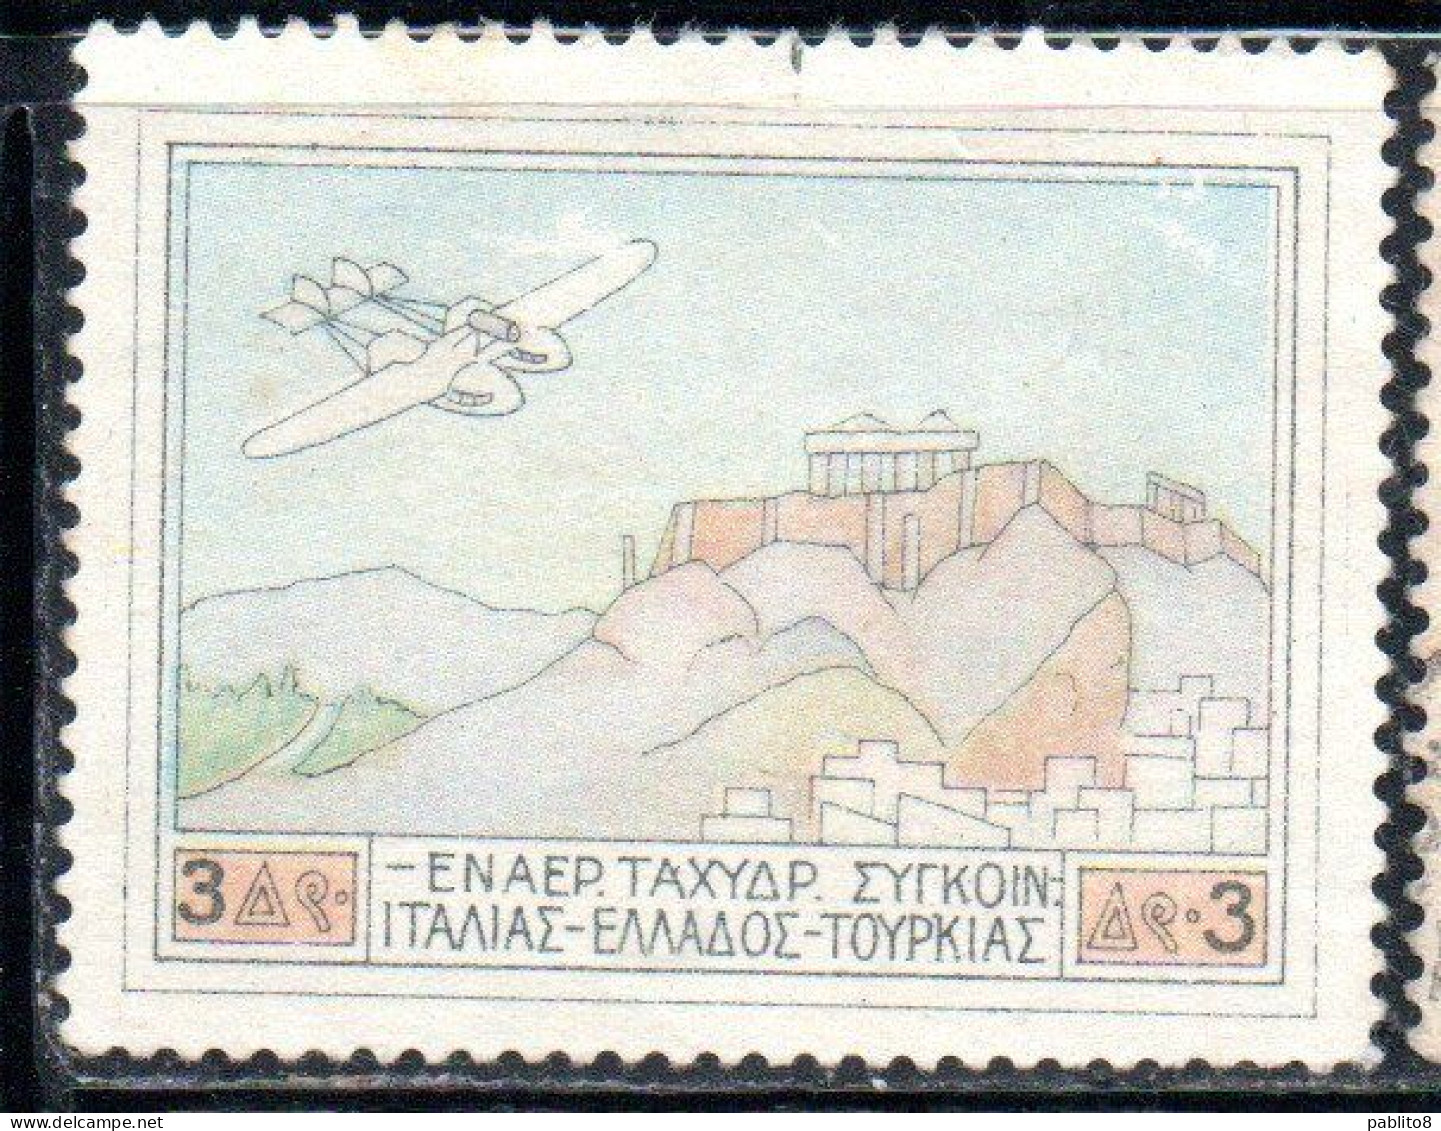 GREECE GRECIA ELLAS 1926 AIR POST MAIL AIRMAIL ITALY-TURKEY-RHODES SERVICE FLYING BOAT OVER ACROPOLIS 3d USED USATO - Gebraucht